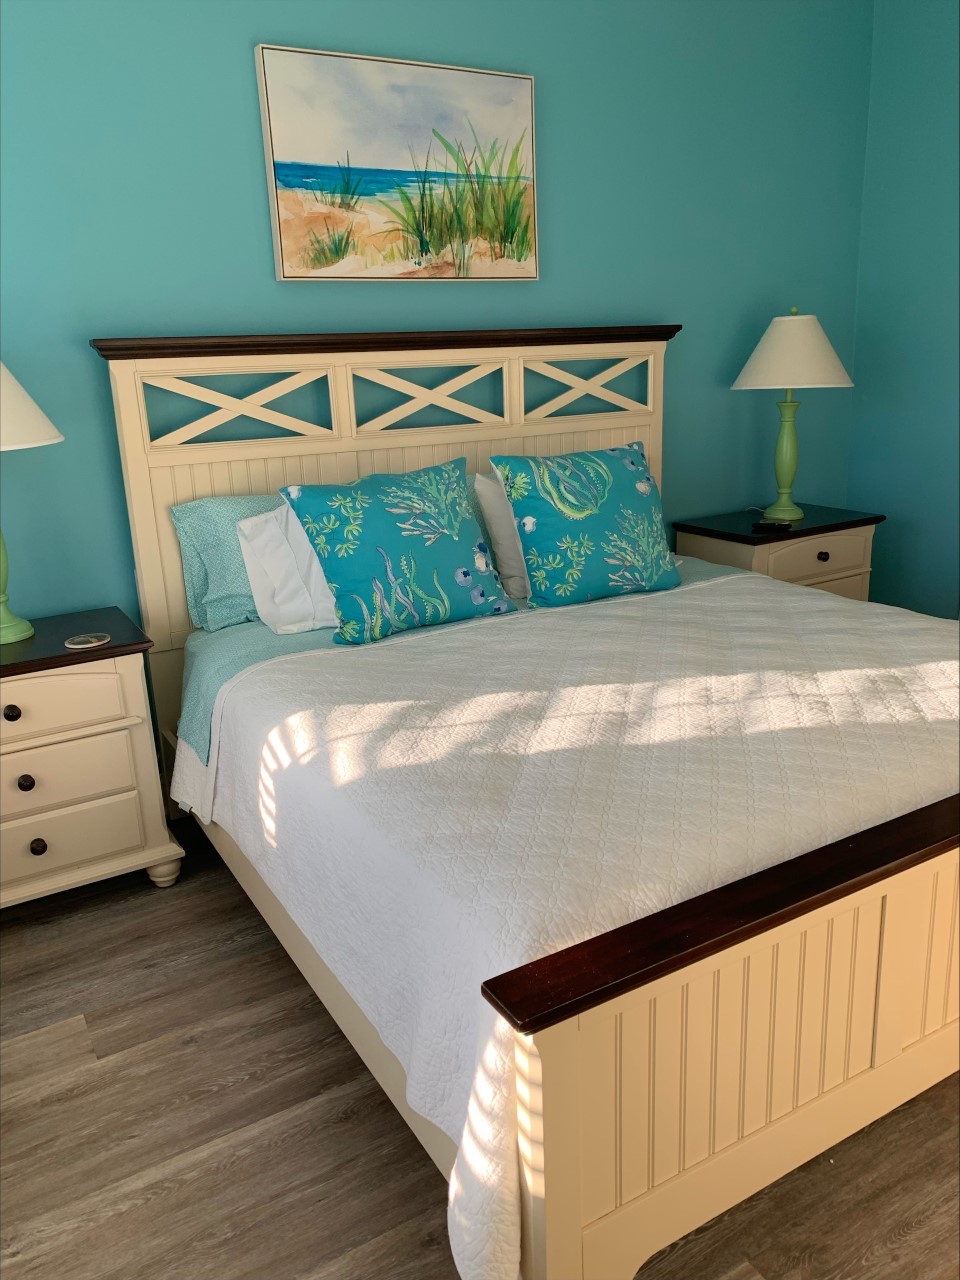 vacation condo for children with cancer provided by cool kids campaign